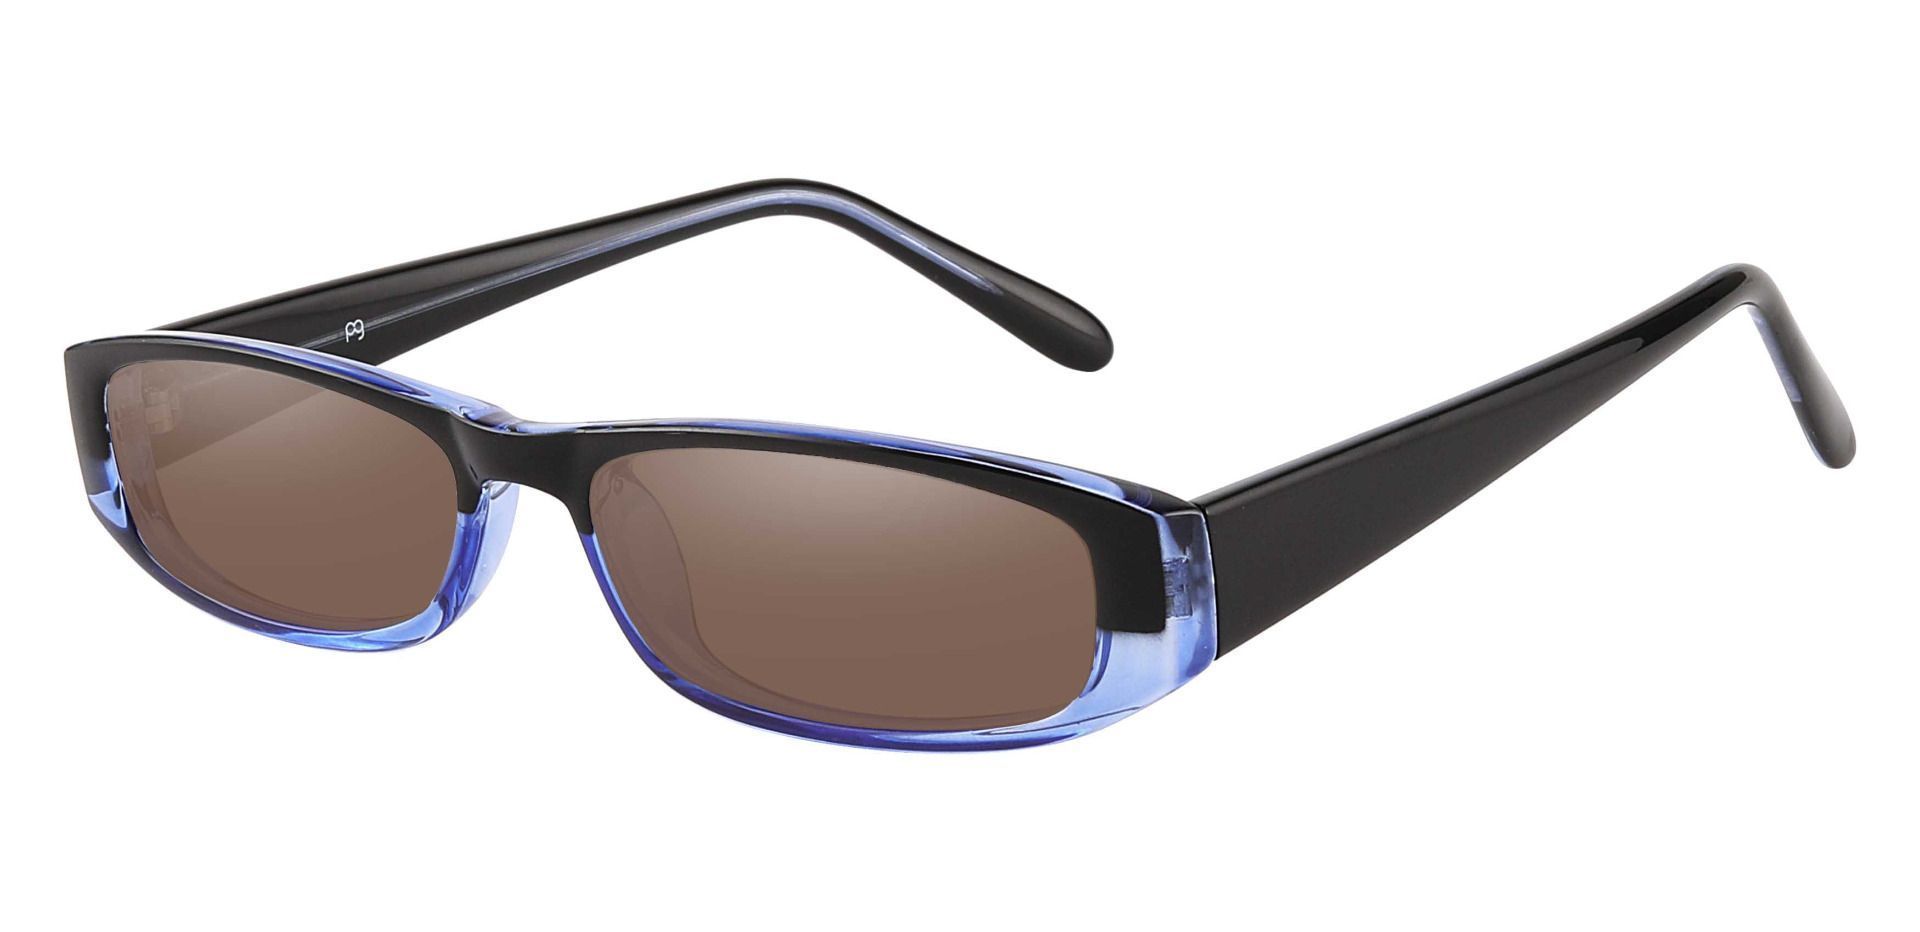 Elgin Rectangle Non-Rx Sunglasses - Blue Frame With Brown Lenses